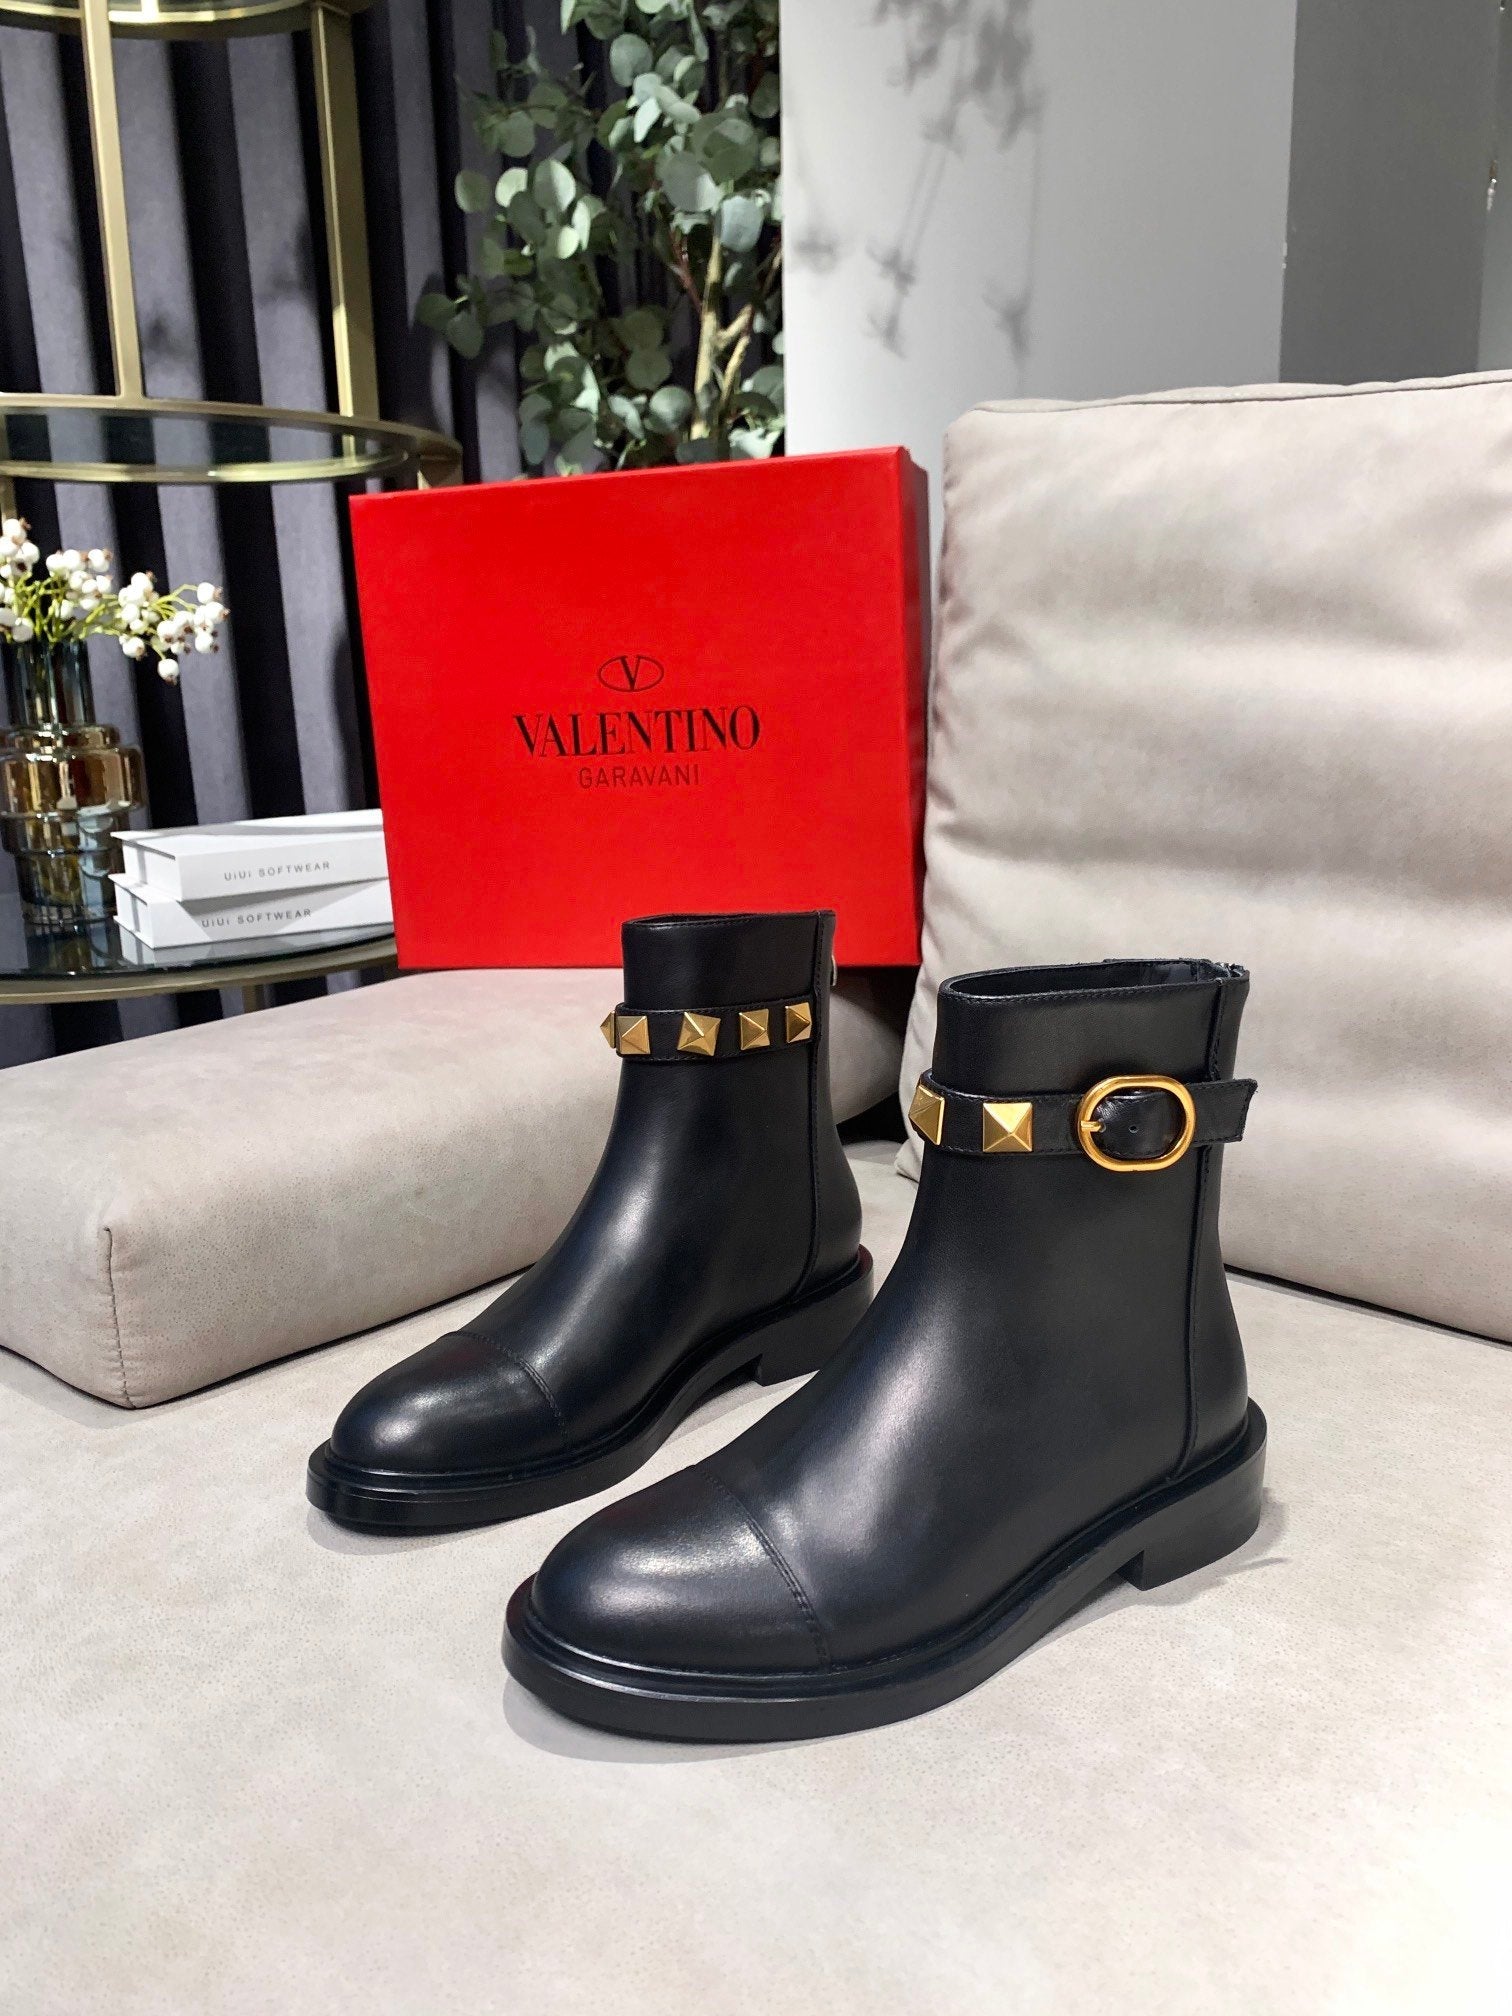 Valentino 2022 New Women's Leather Fashion Side Zip Lace-up Ankle Boots Shoes Heels